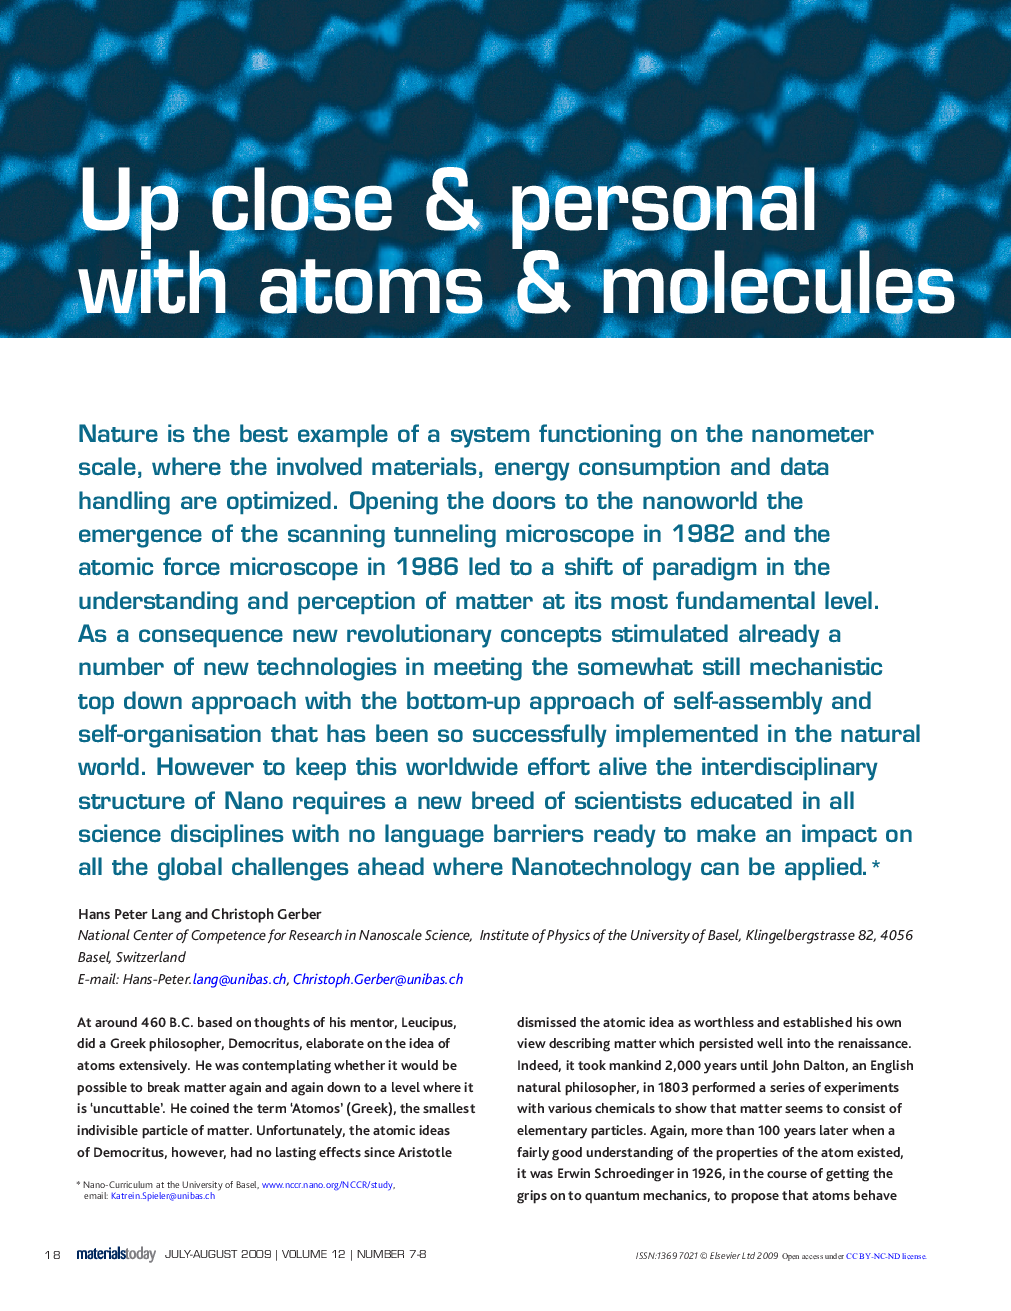 Up close & personal with atoms & molecules